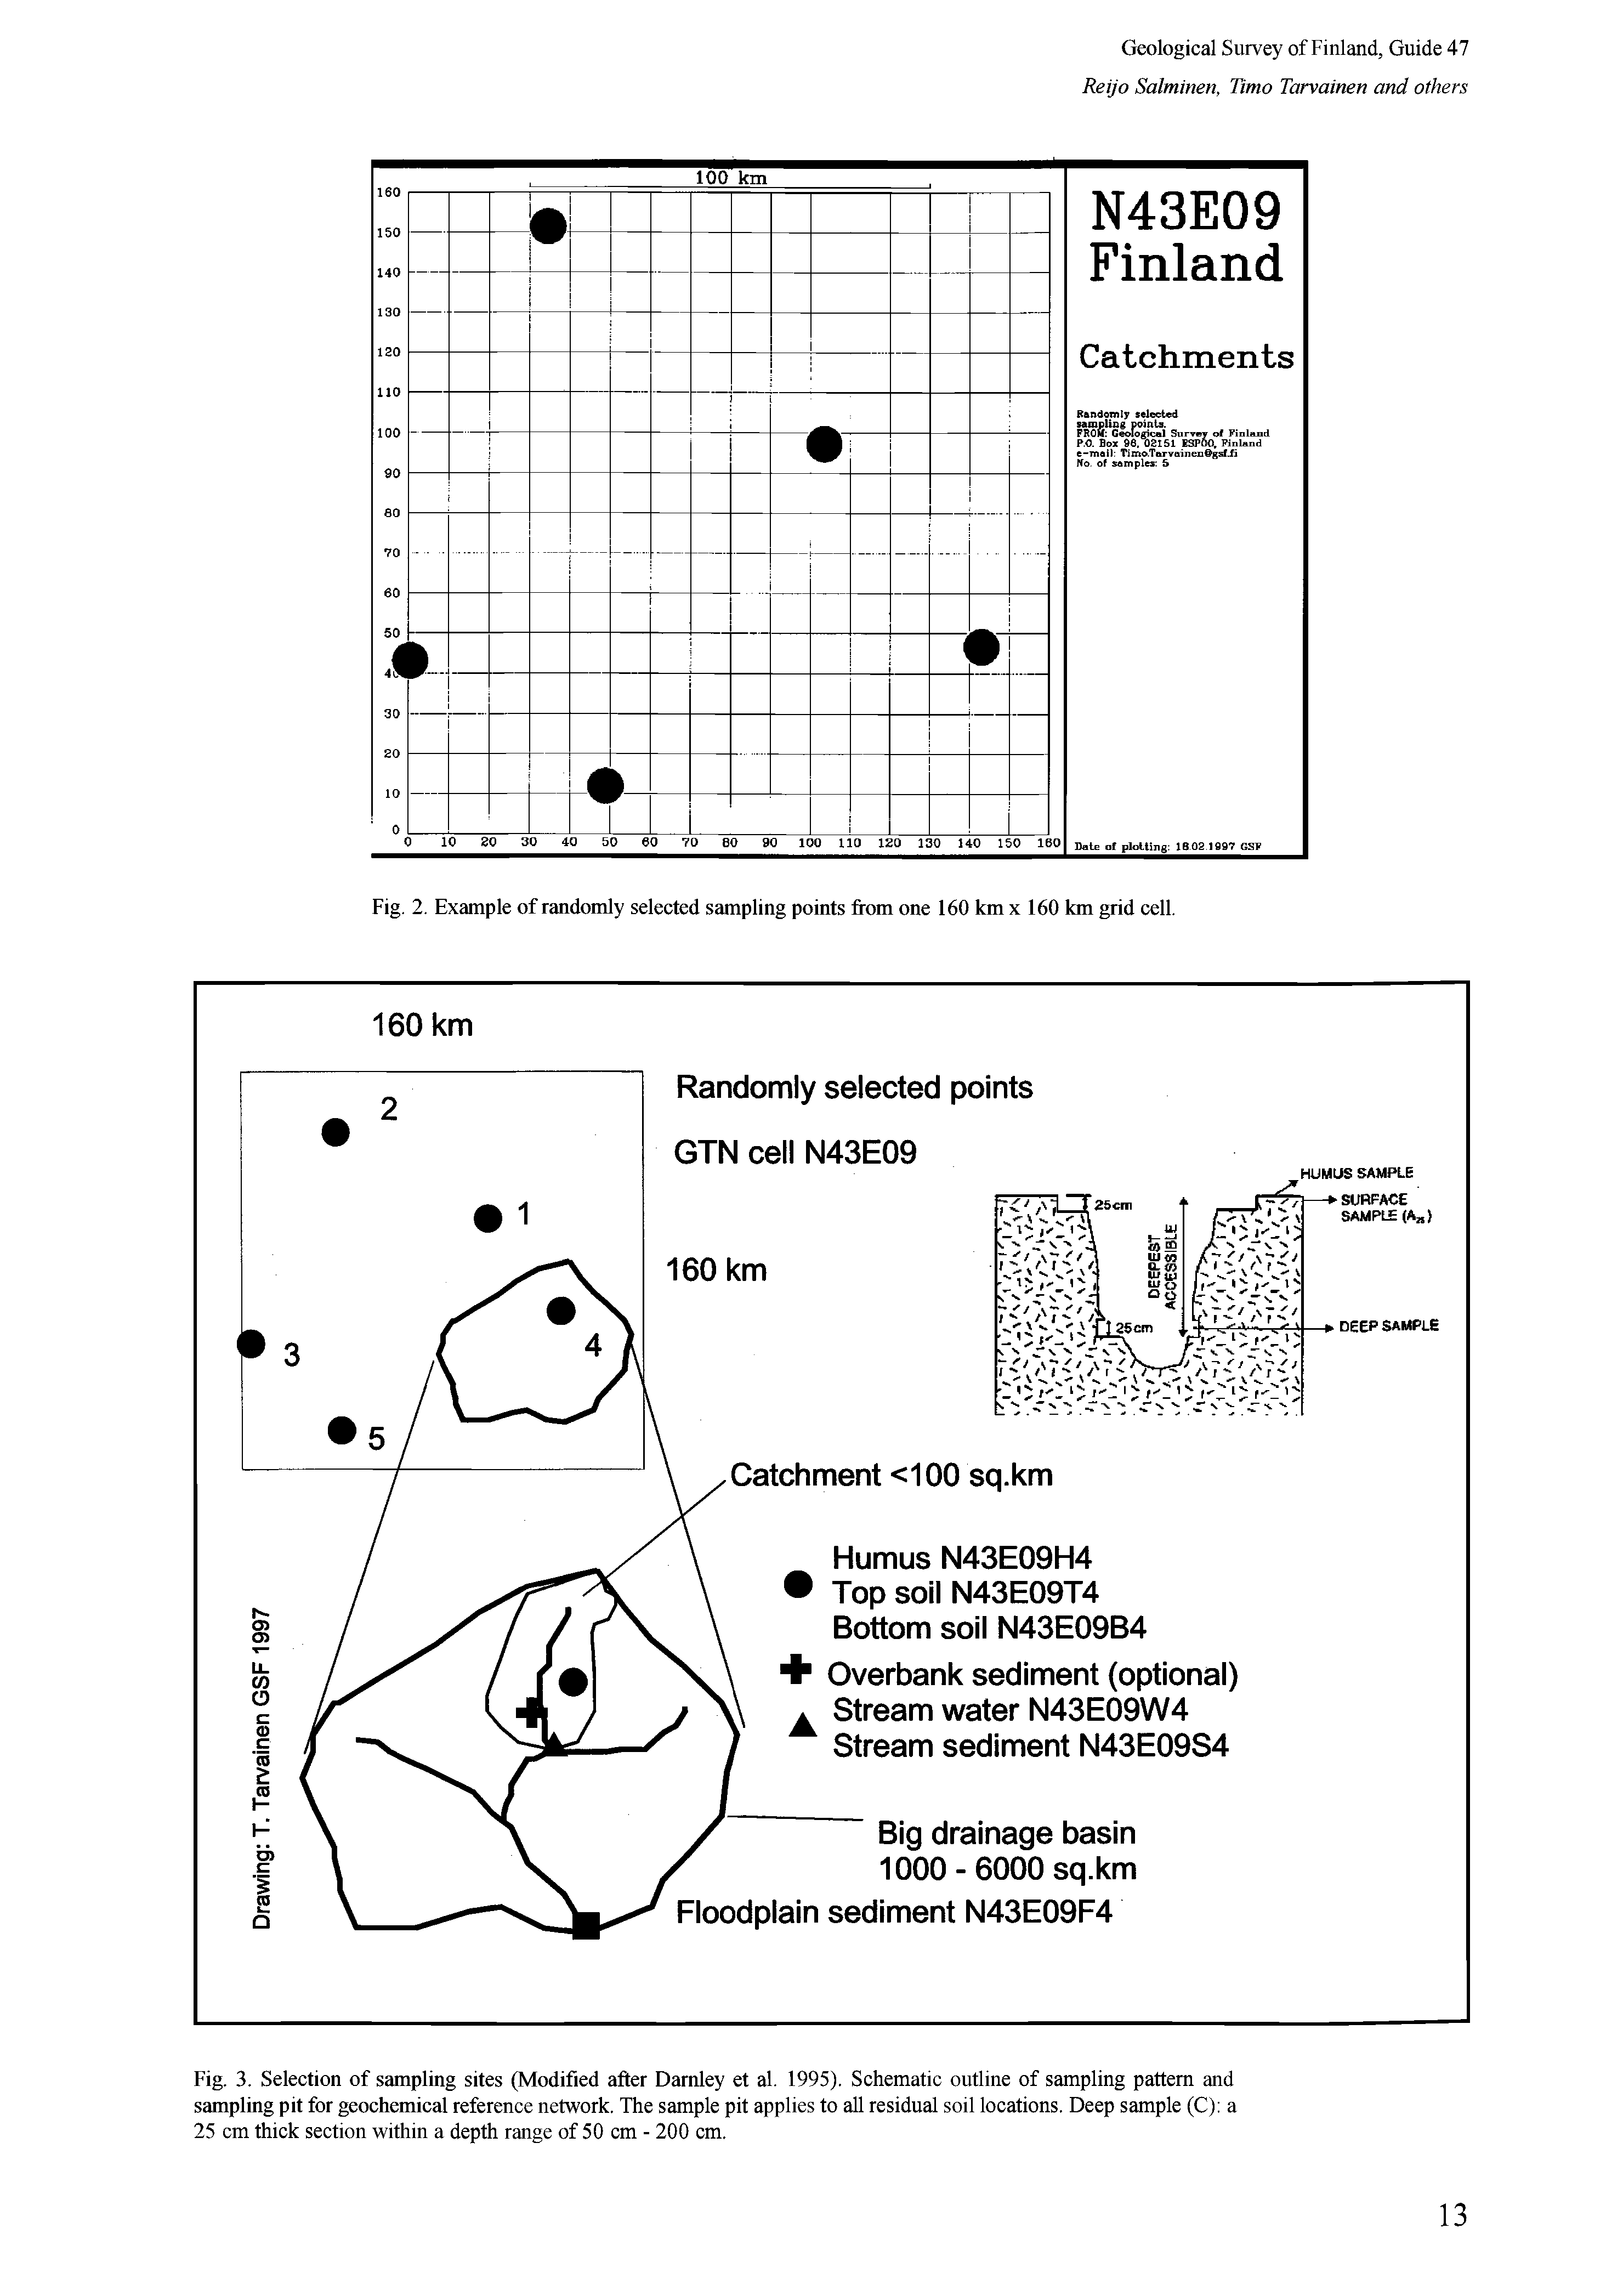 Fig. 3. Selection of sampling sites (Modified after Darnley et al. 1995). Schematic outline of sampling pattern and sampling pit for geochemical reference network. The sample pit applies to all residual soil locations. Deep sample (C) a 25 cm thick section within a depth range of 50 cm - 200 cm.